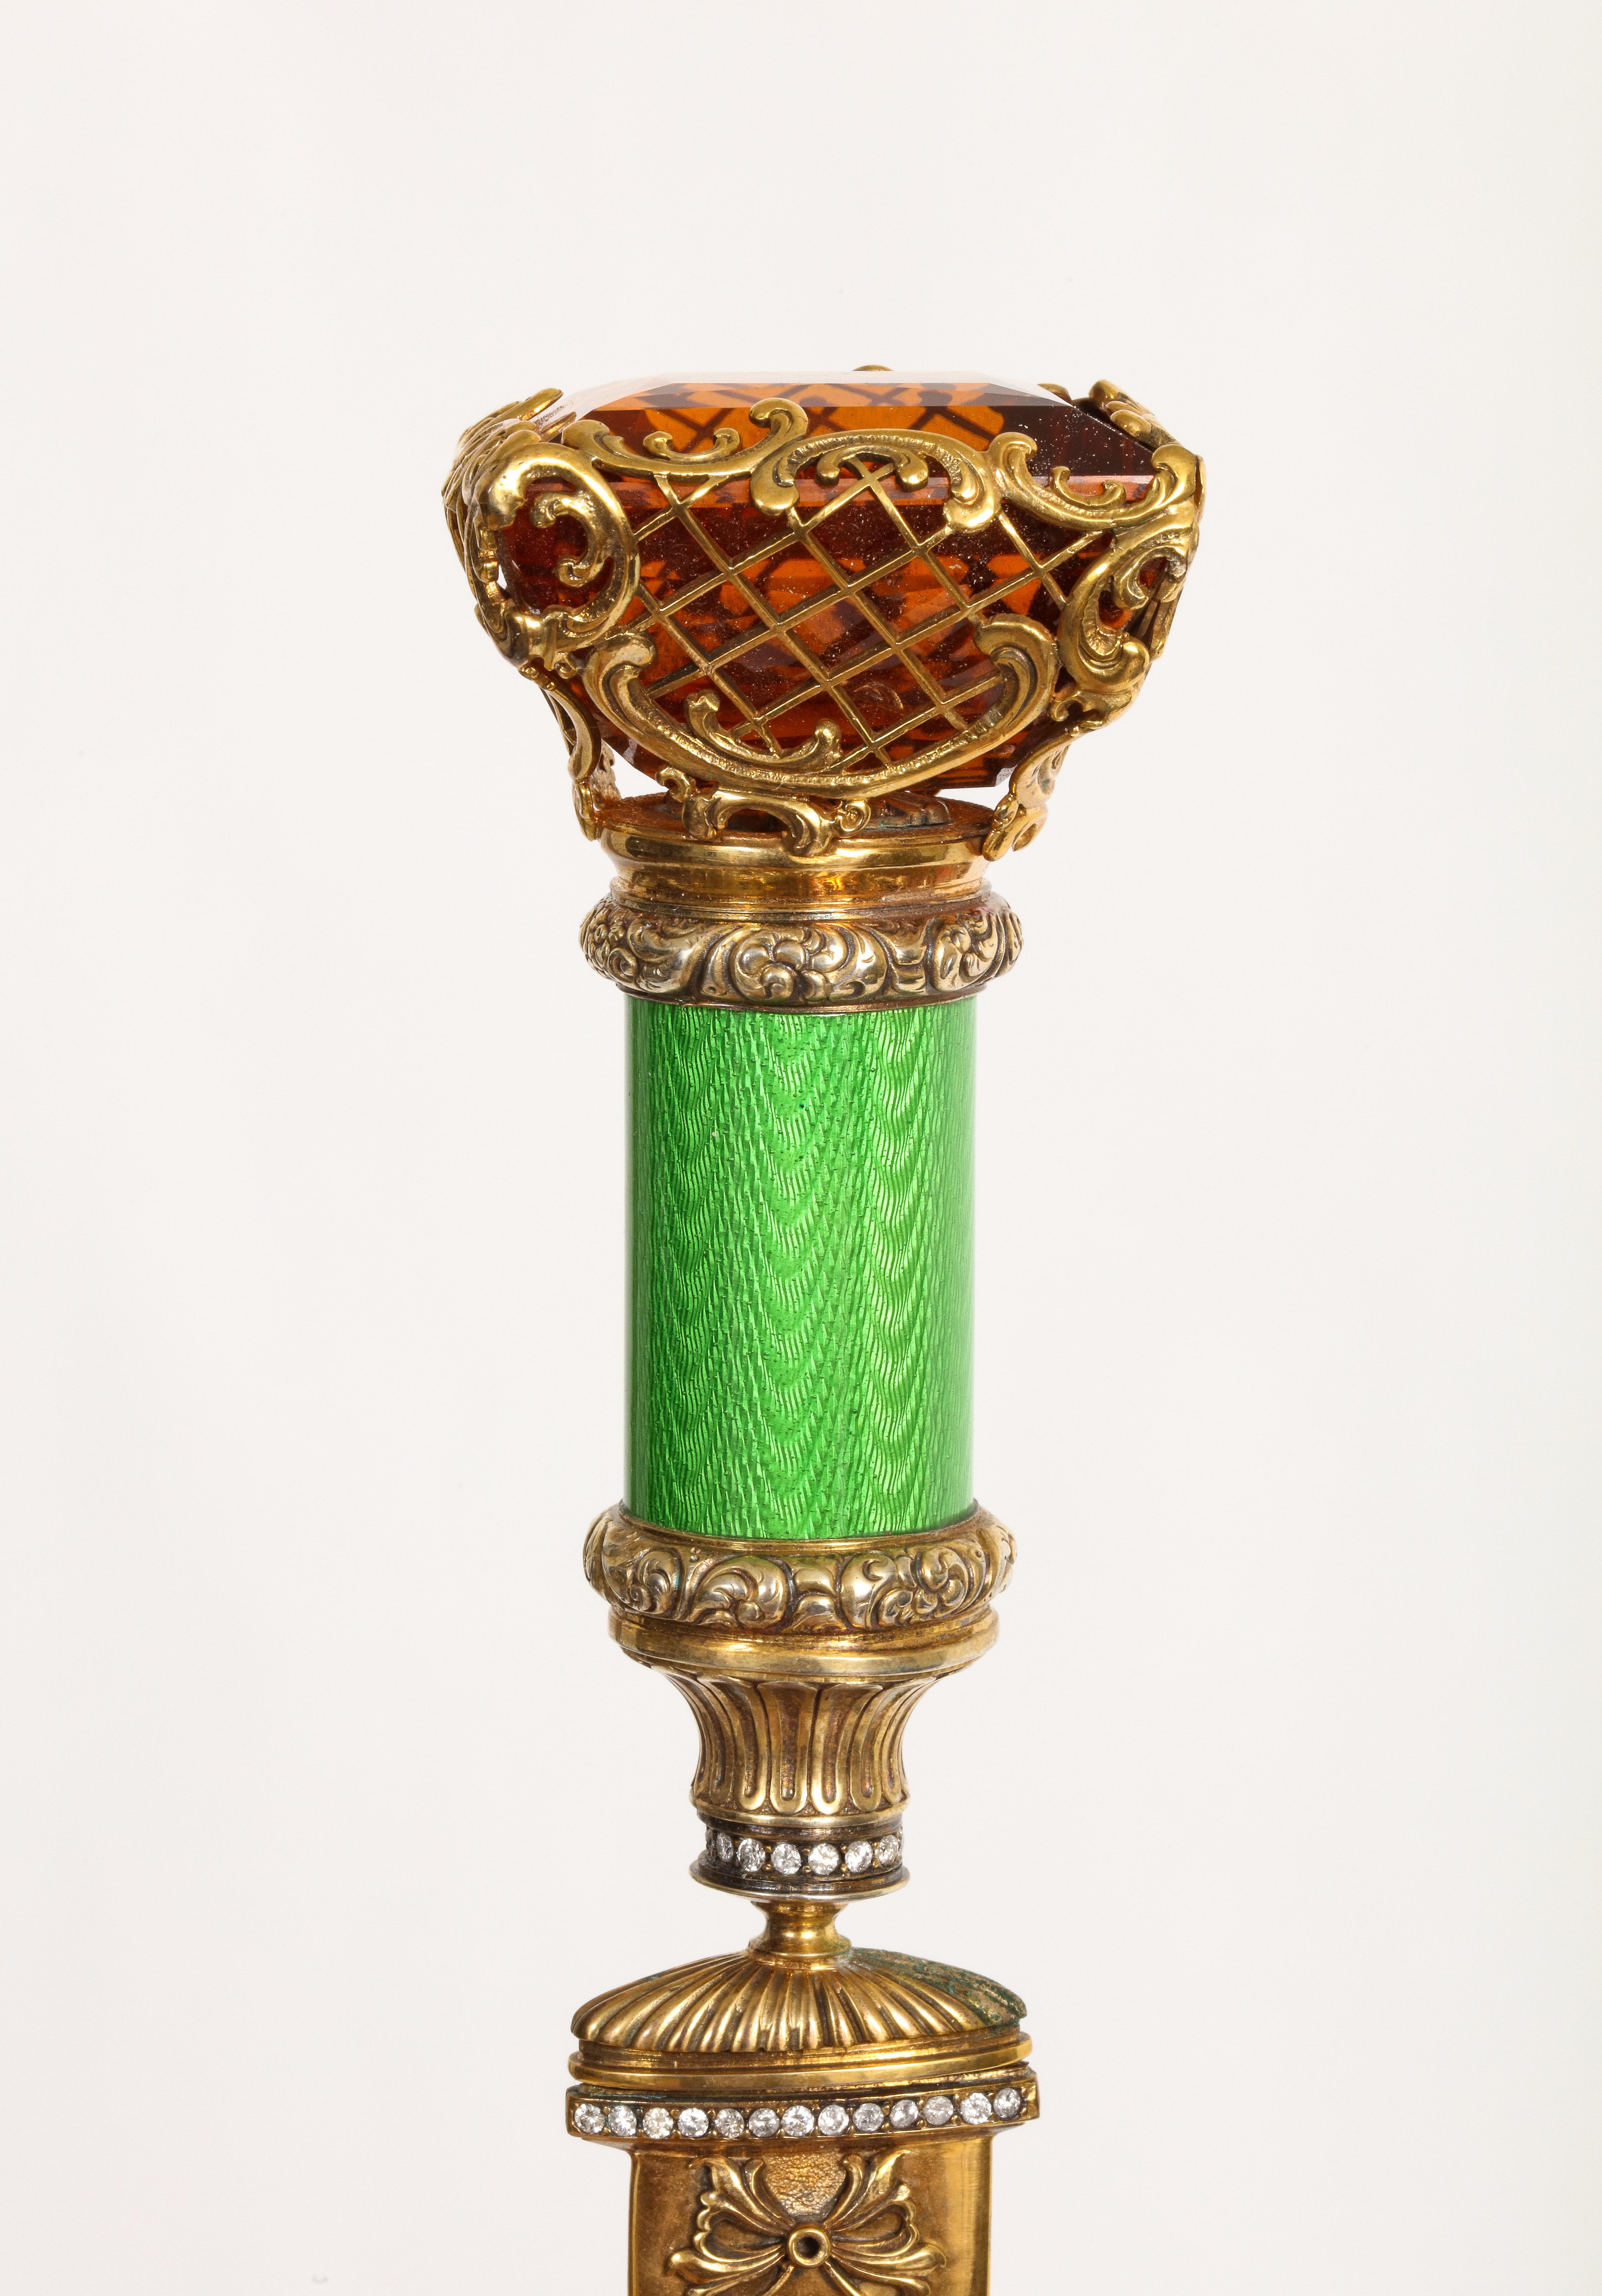 Large citrine gilt silver & diamond letter opener
Set with round diamonds and green enamel
Measurements: 9.5